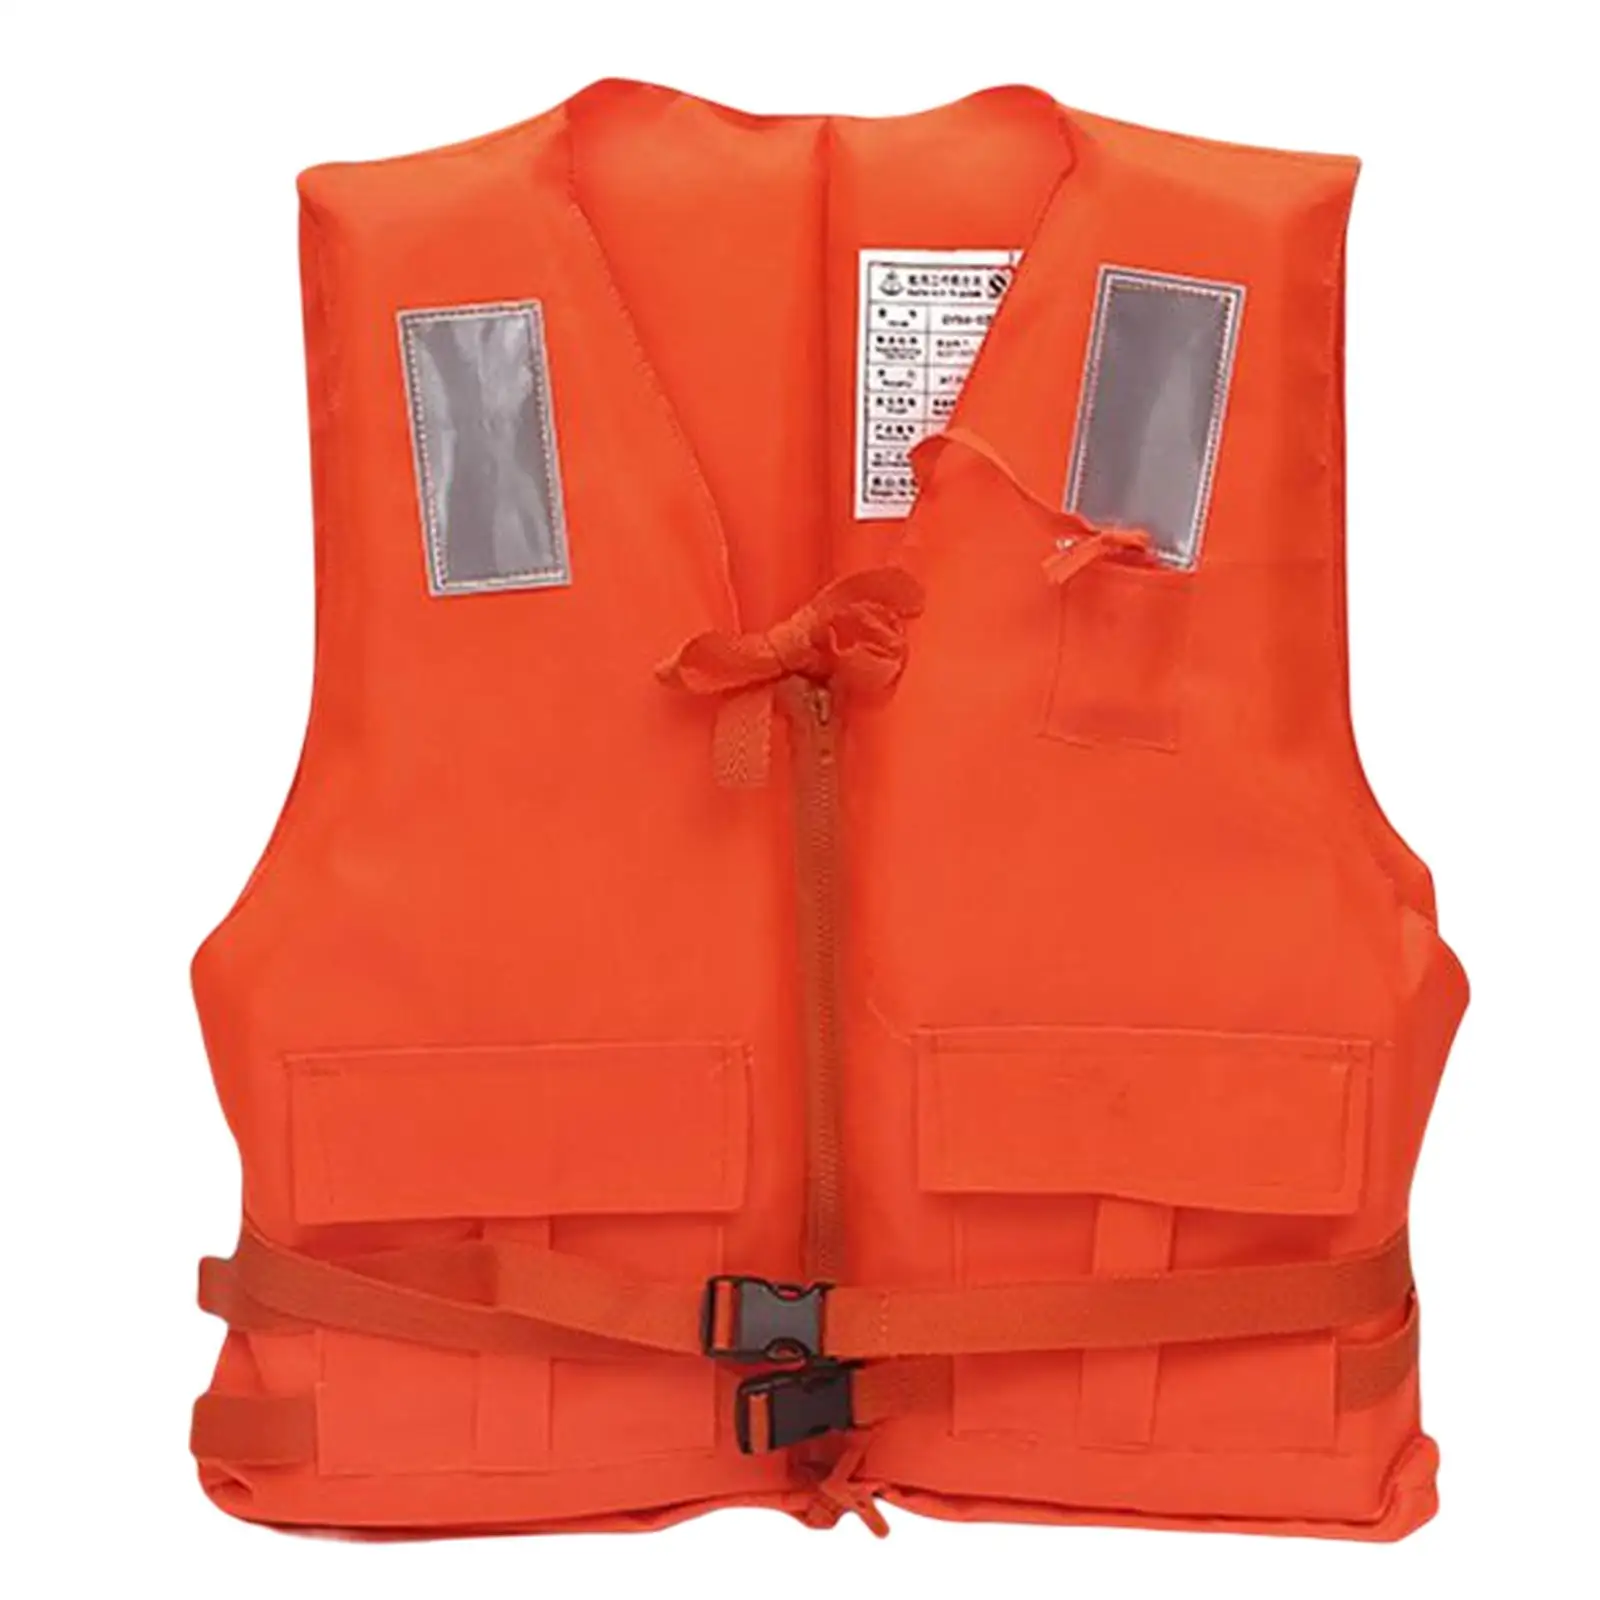 Outdoor Life Jacket Fly Fishing Jacket Reflective Strip Buoyancy Aid Adult Life Vest for Drifting Boating Wimming Adult Sailing